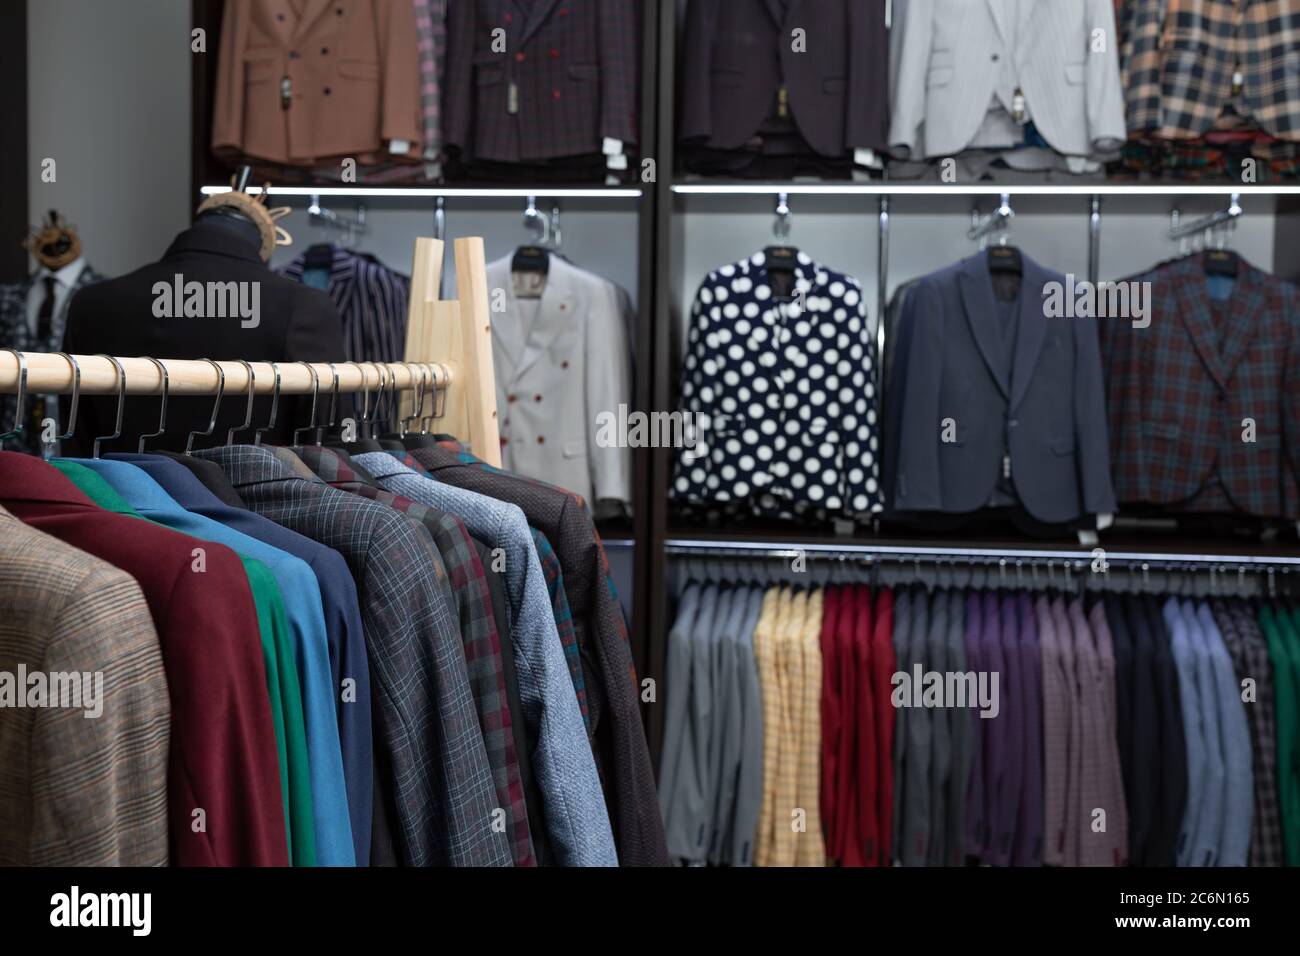 expensive men's clothing store. a row of jackets on hangers. shoping sale background theme. clothes on hanger in shop Stock Photo